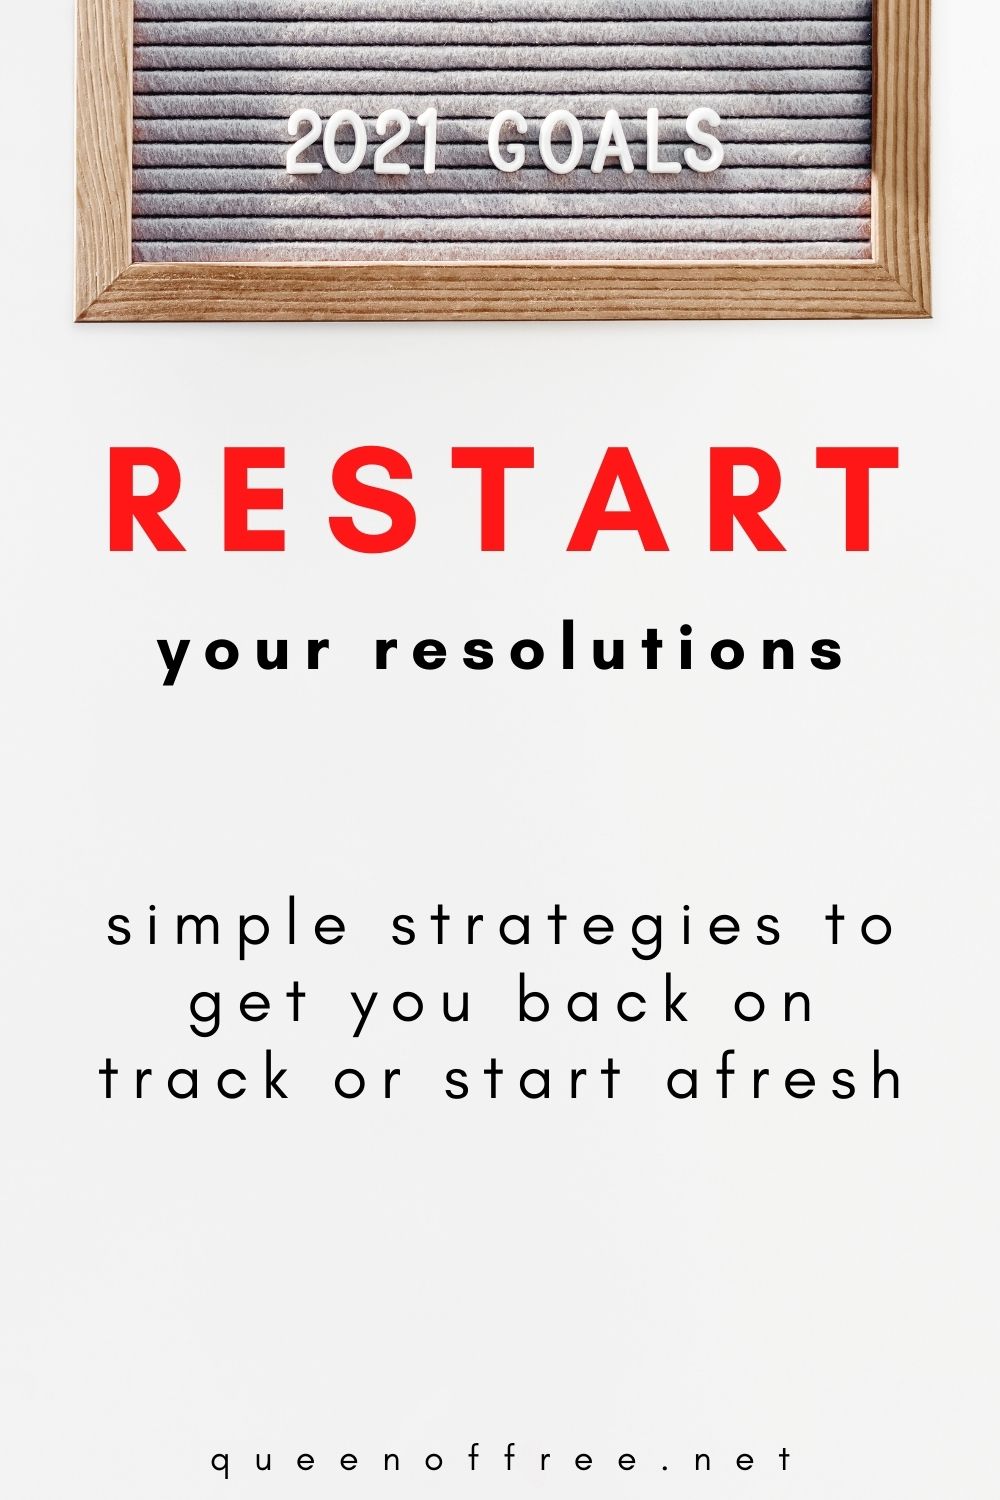 Oh no! Did your resolution fall apart? It's ok. These incredibly simple strategies will get you back on track and redefine your goals.